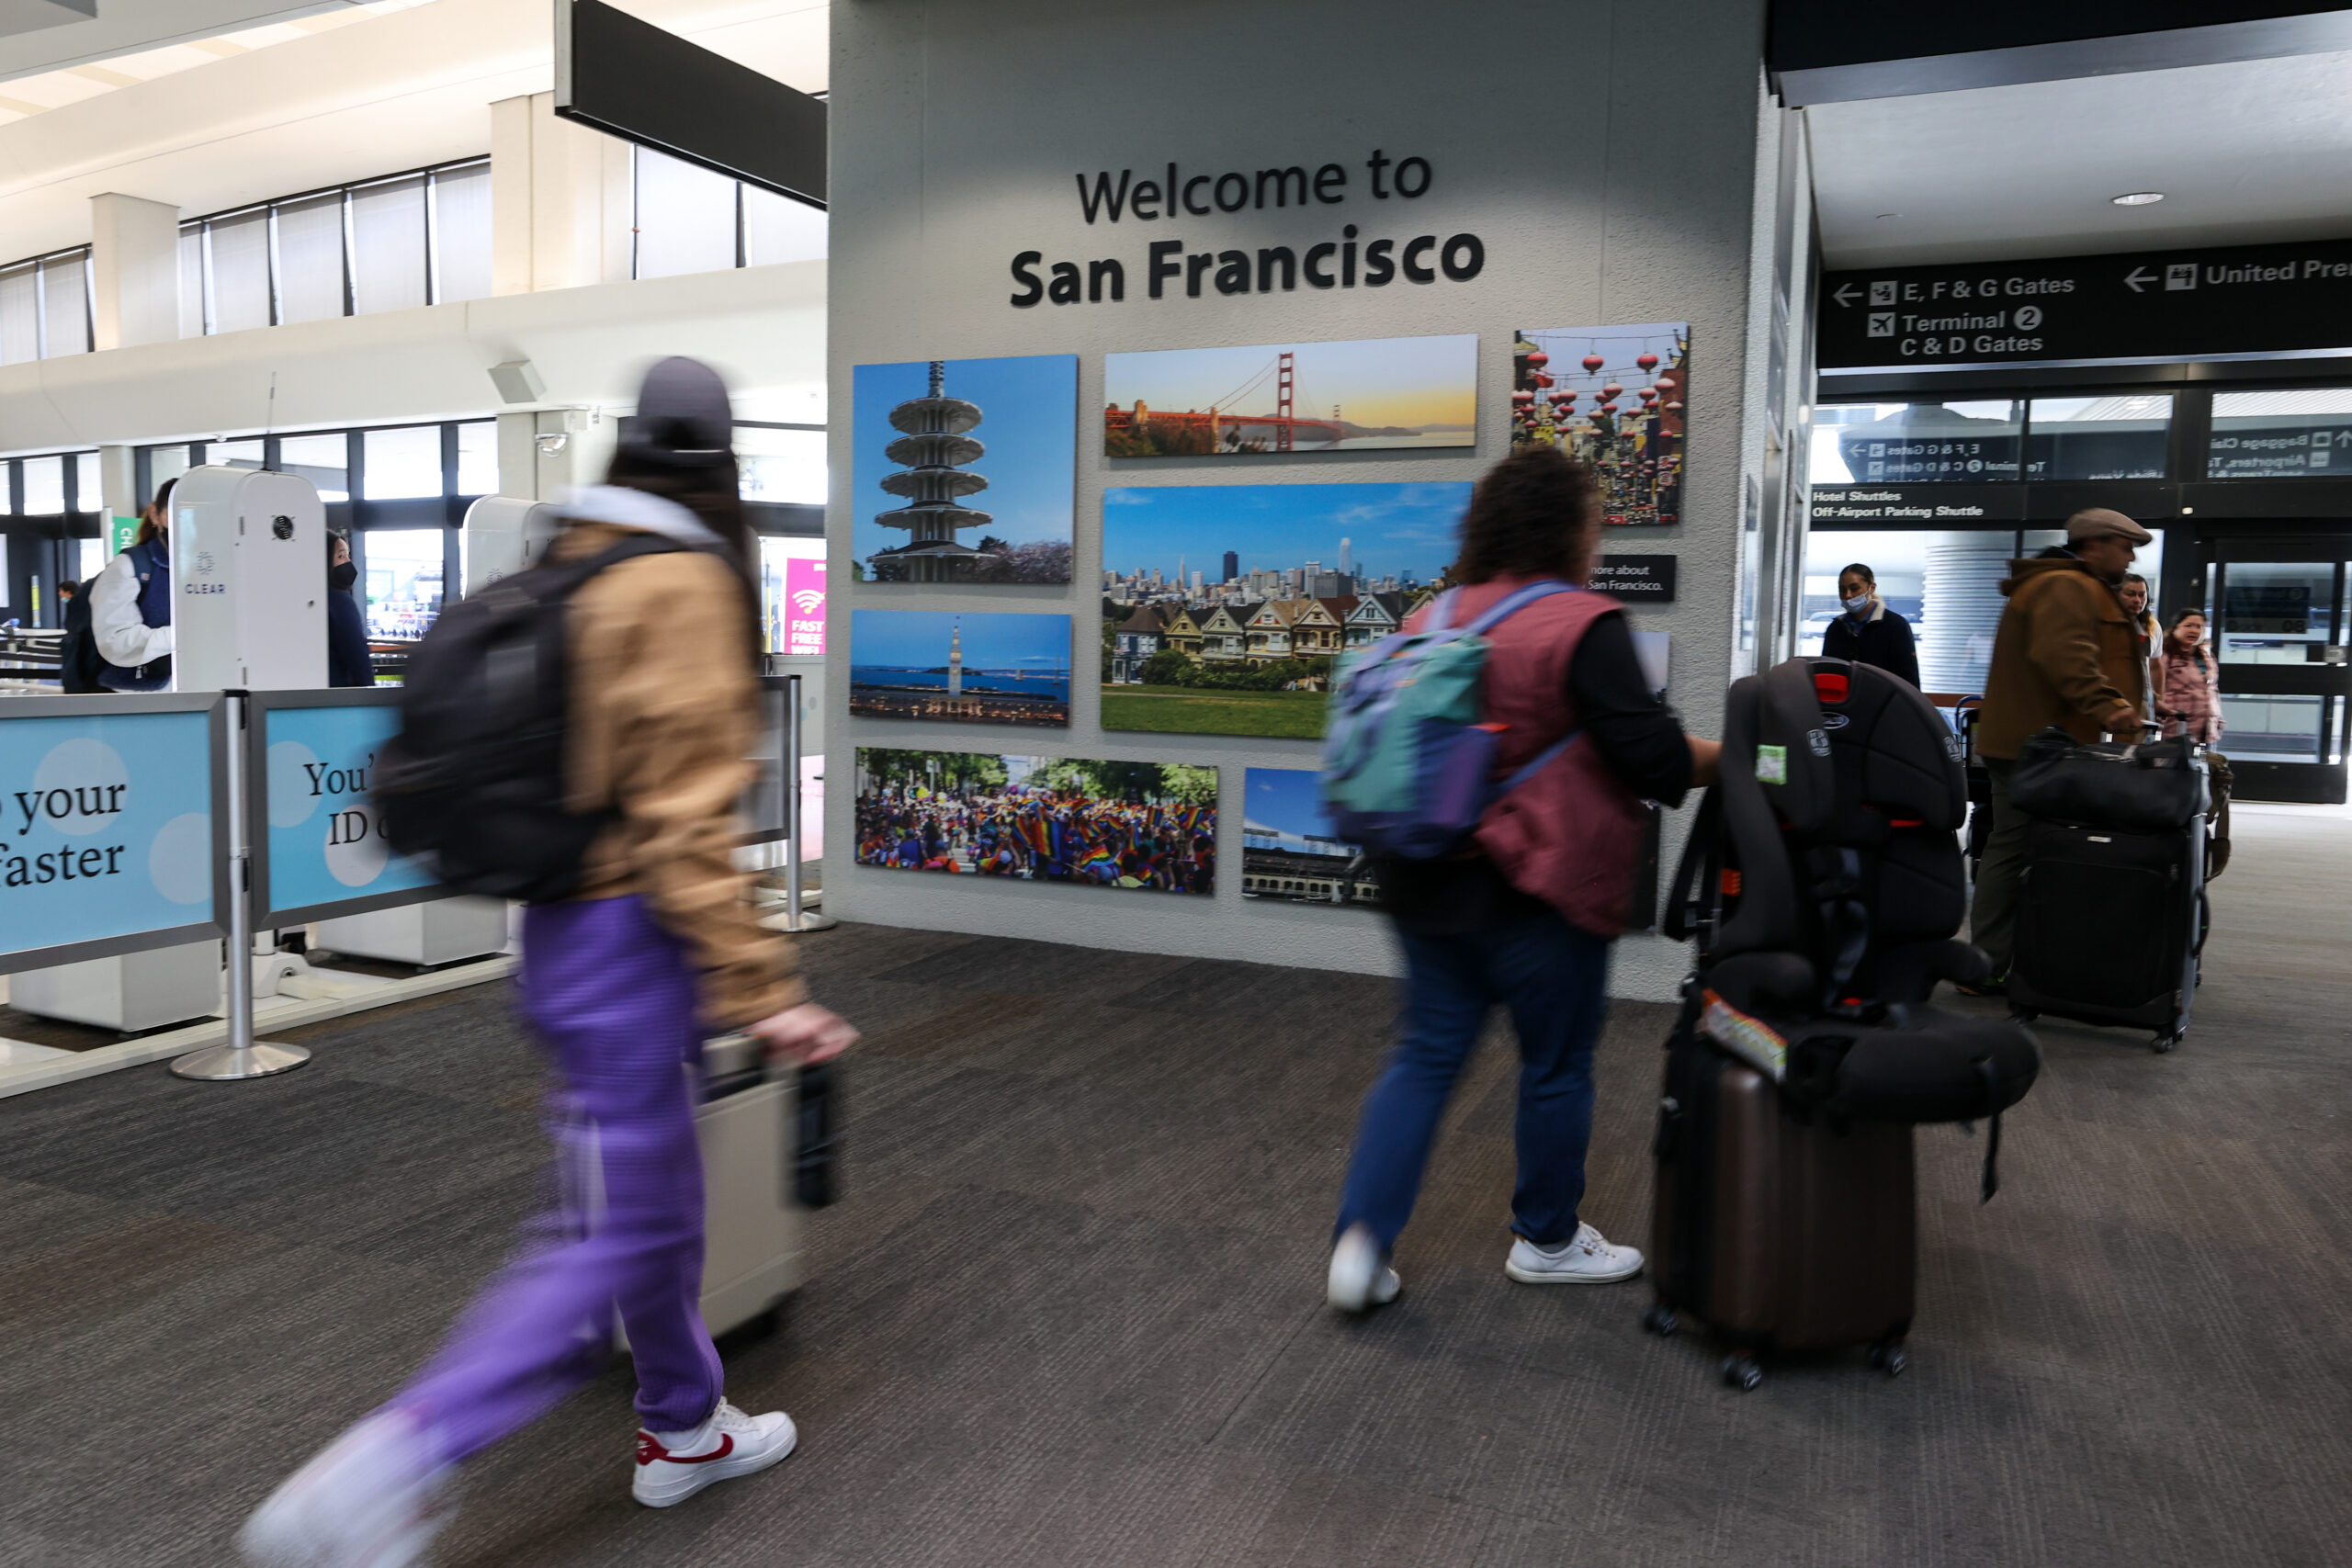 San Francisco Airport Terminal Evacuated After Suspicious Package Report